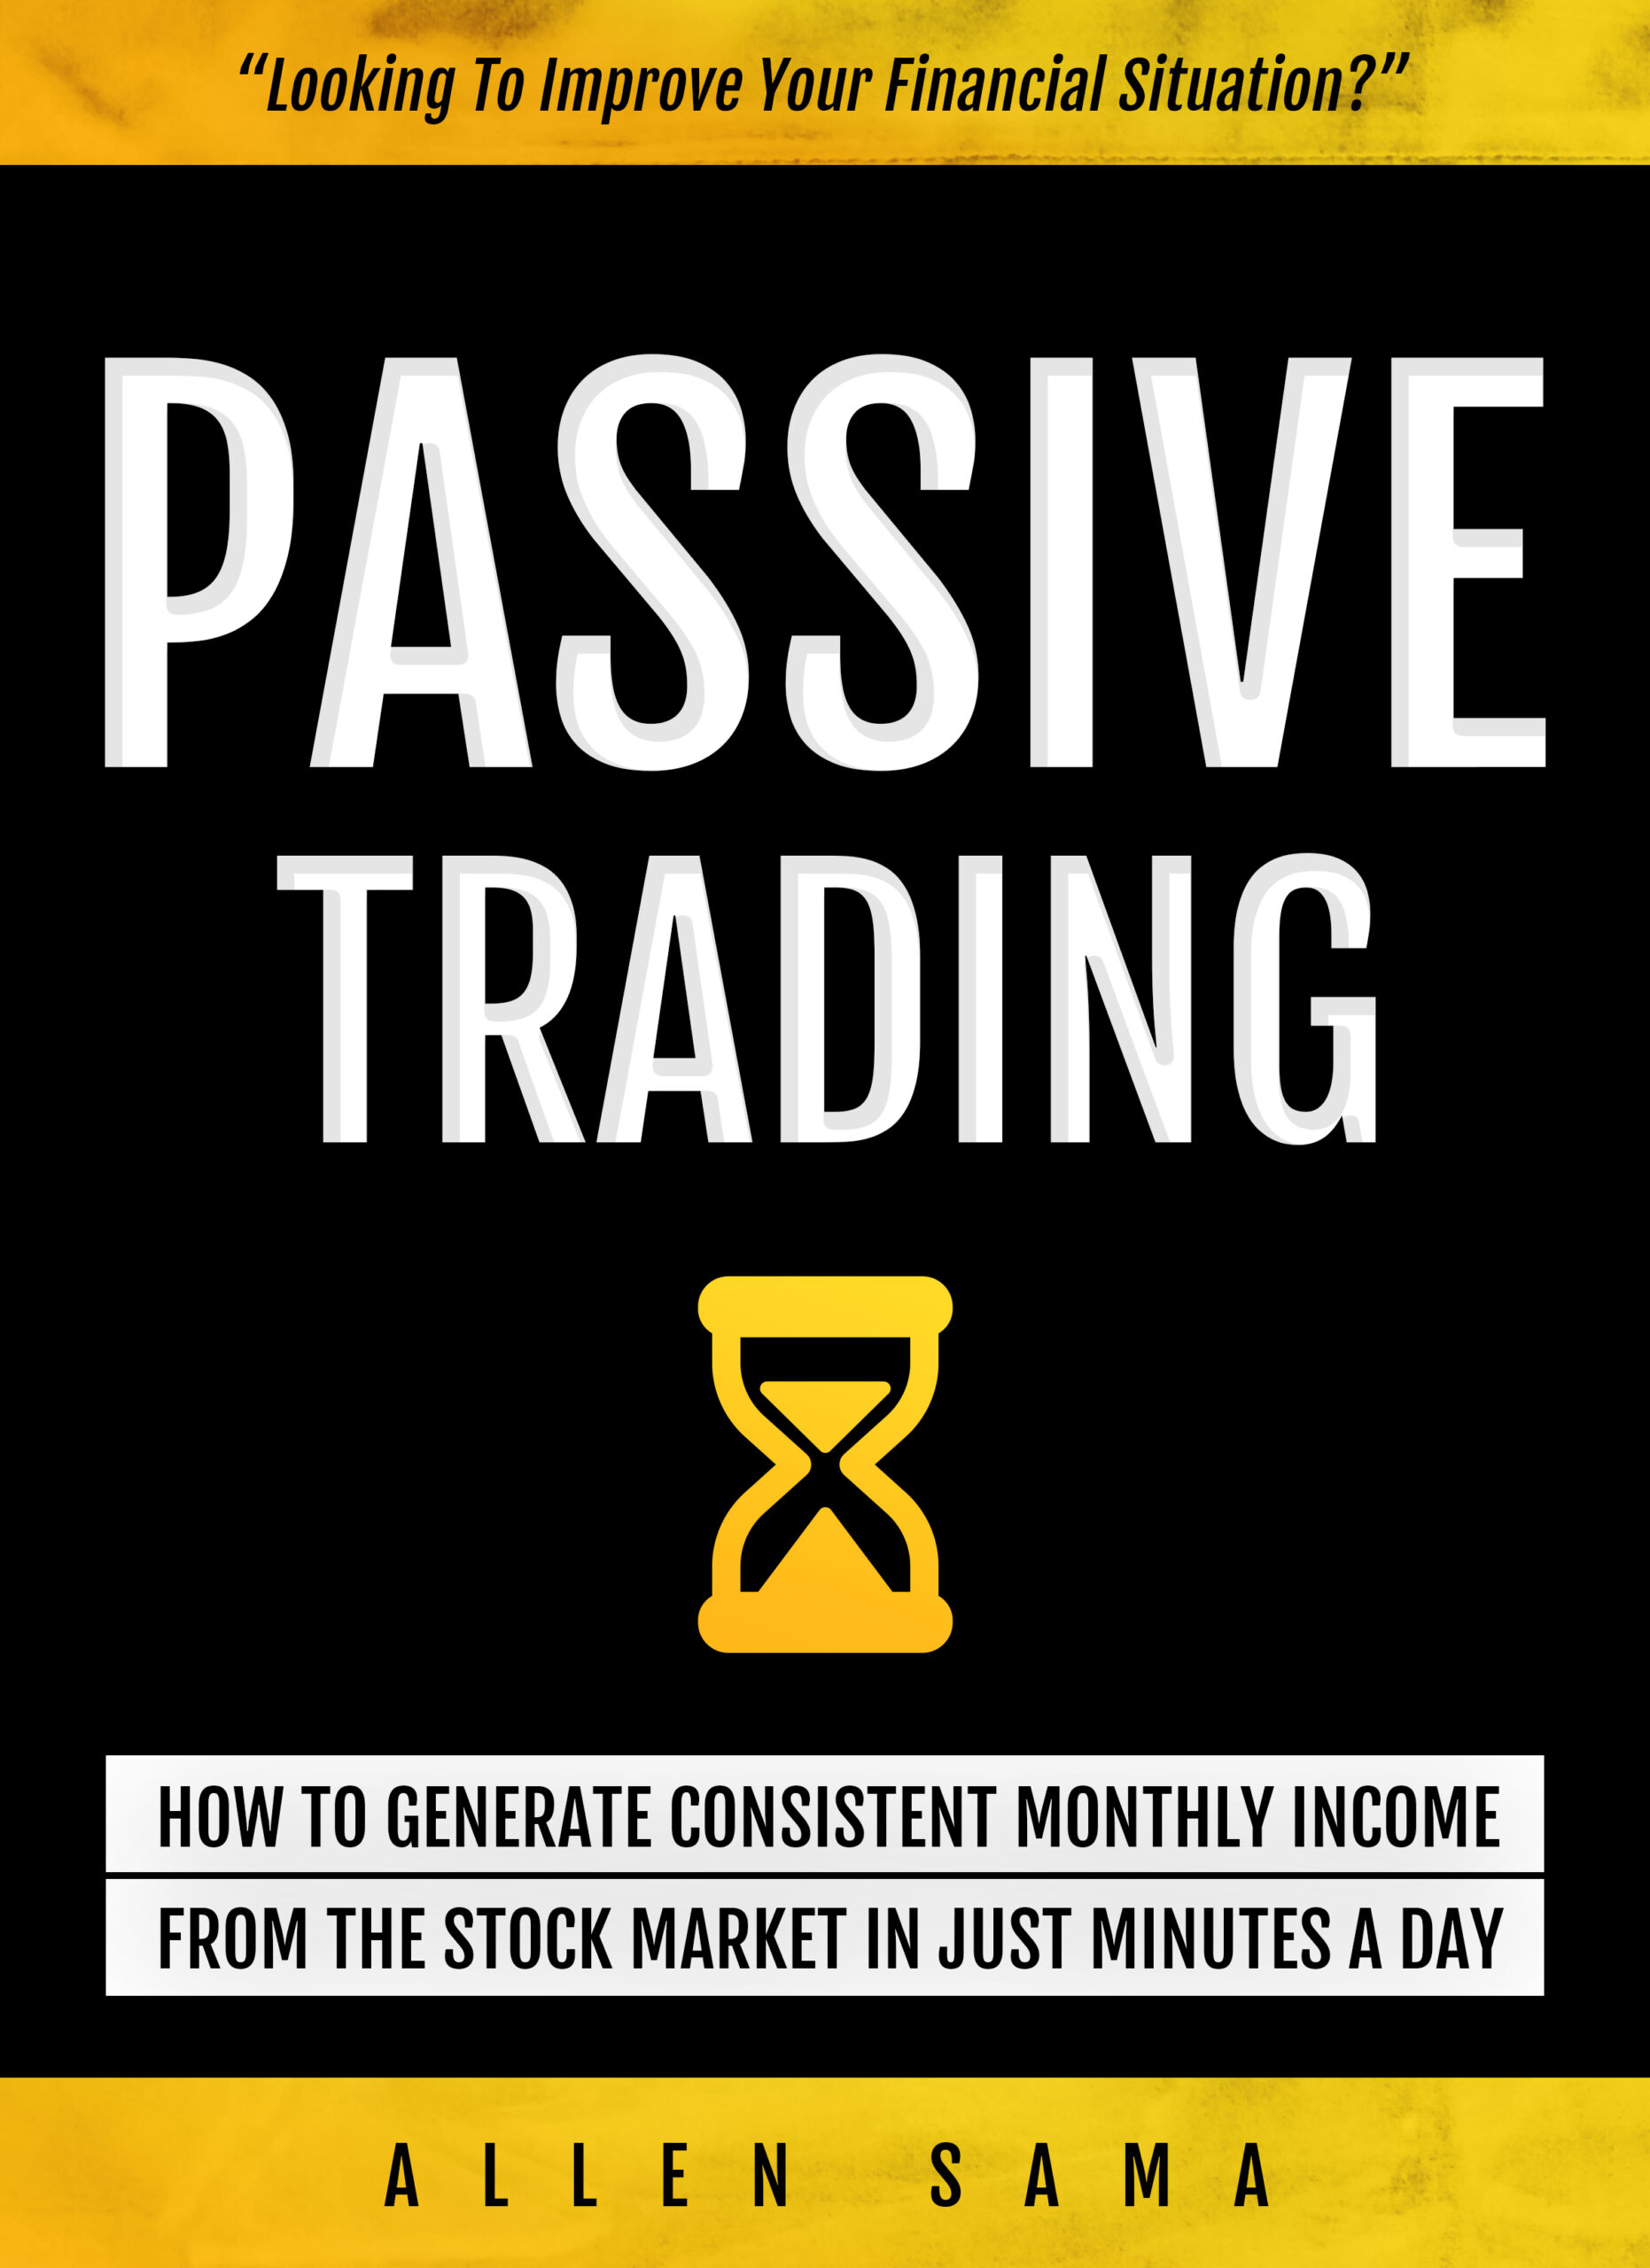 FREE: Passive Trading: How To Generate Consistent Monthly Income From The Stock Market In Just Minutes A Day by Allen Sama